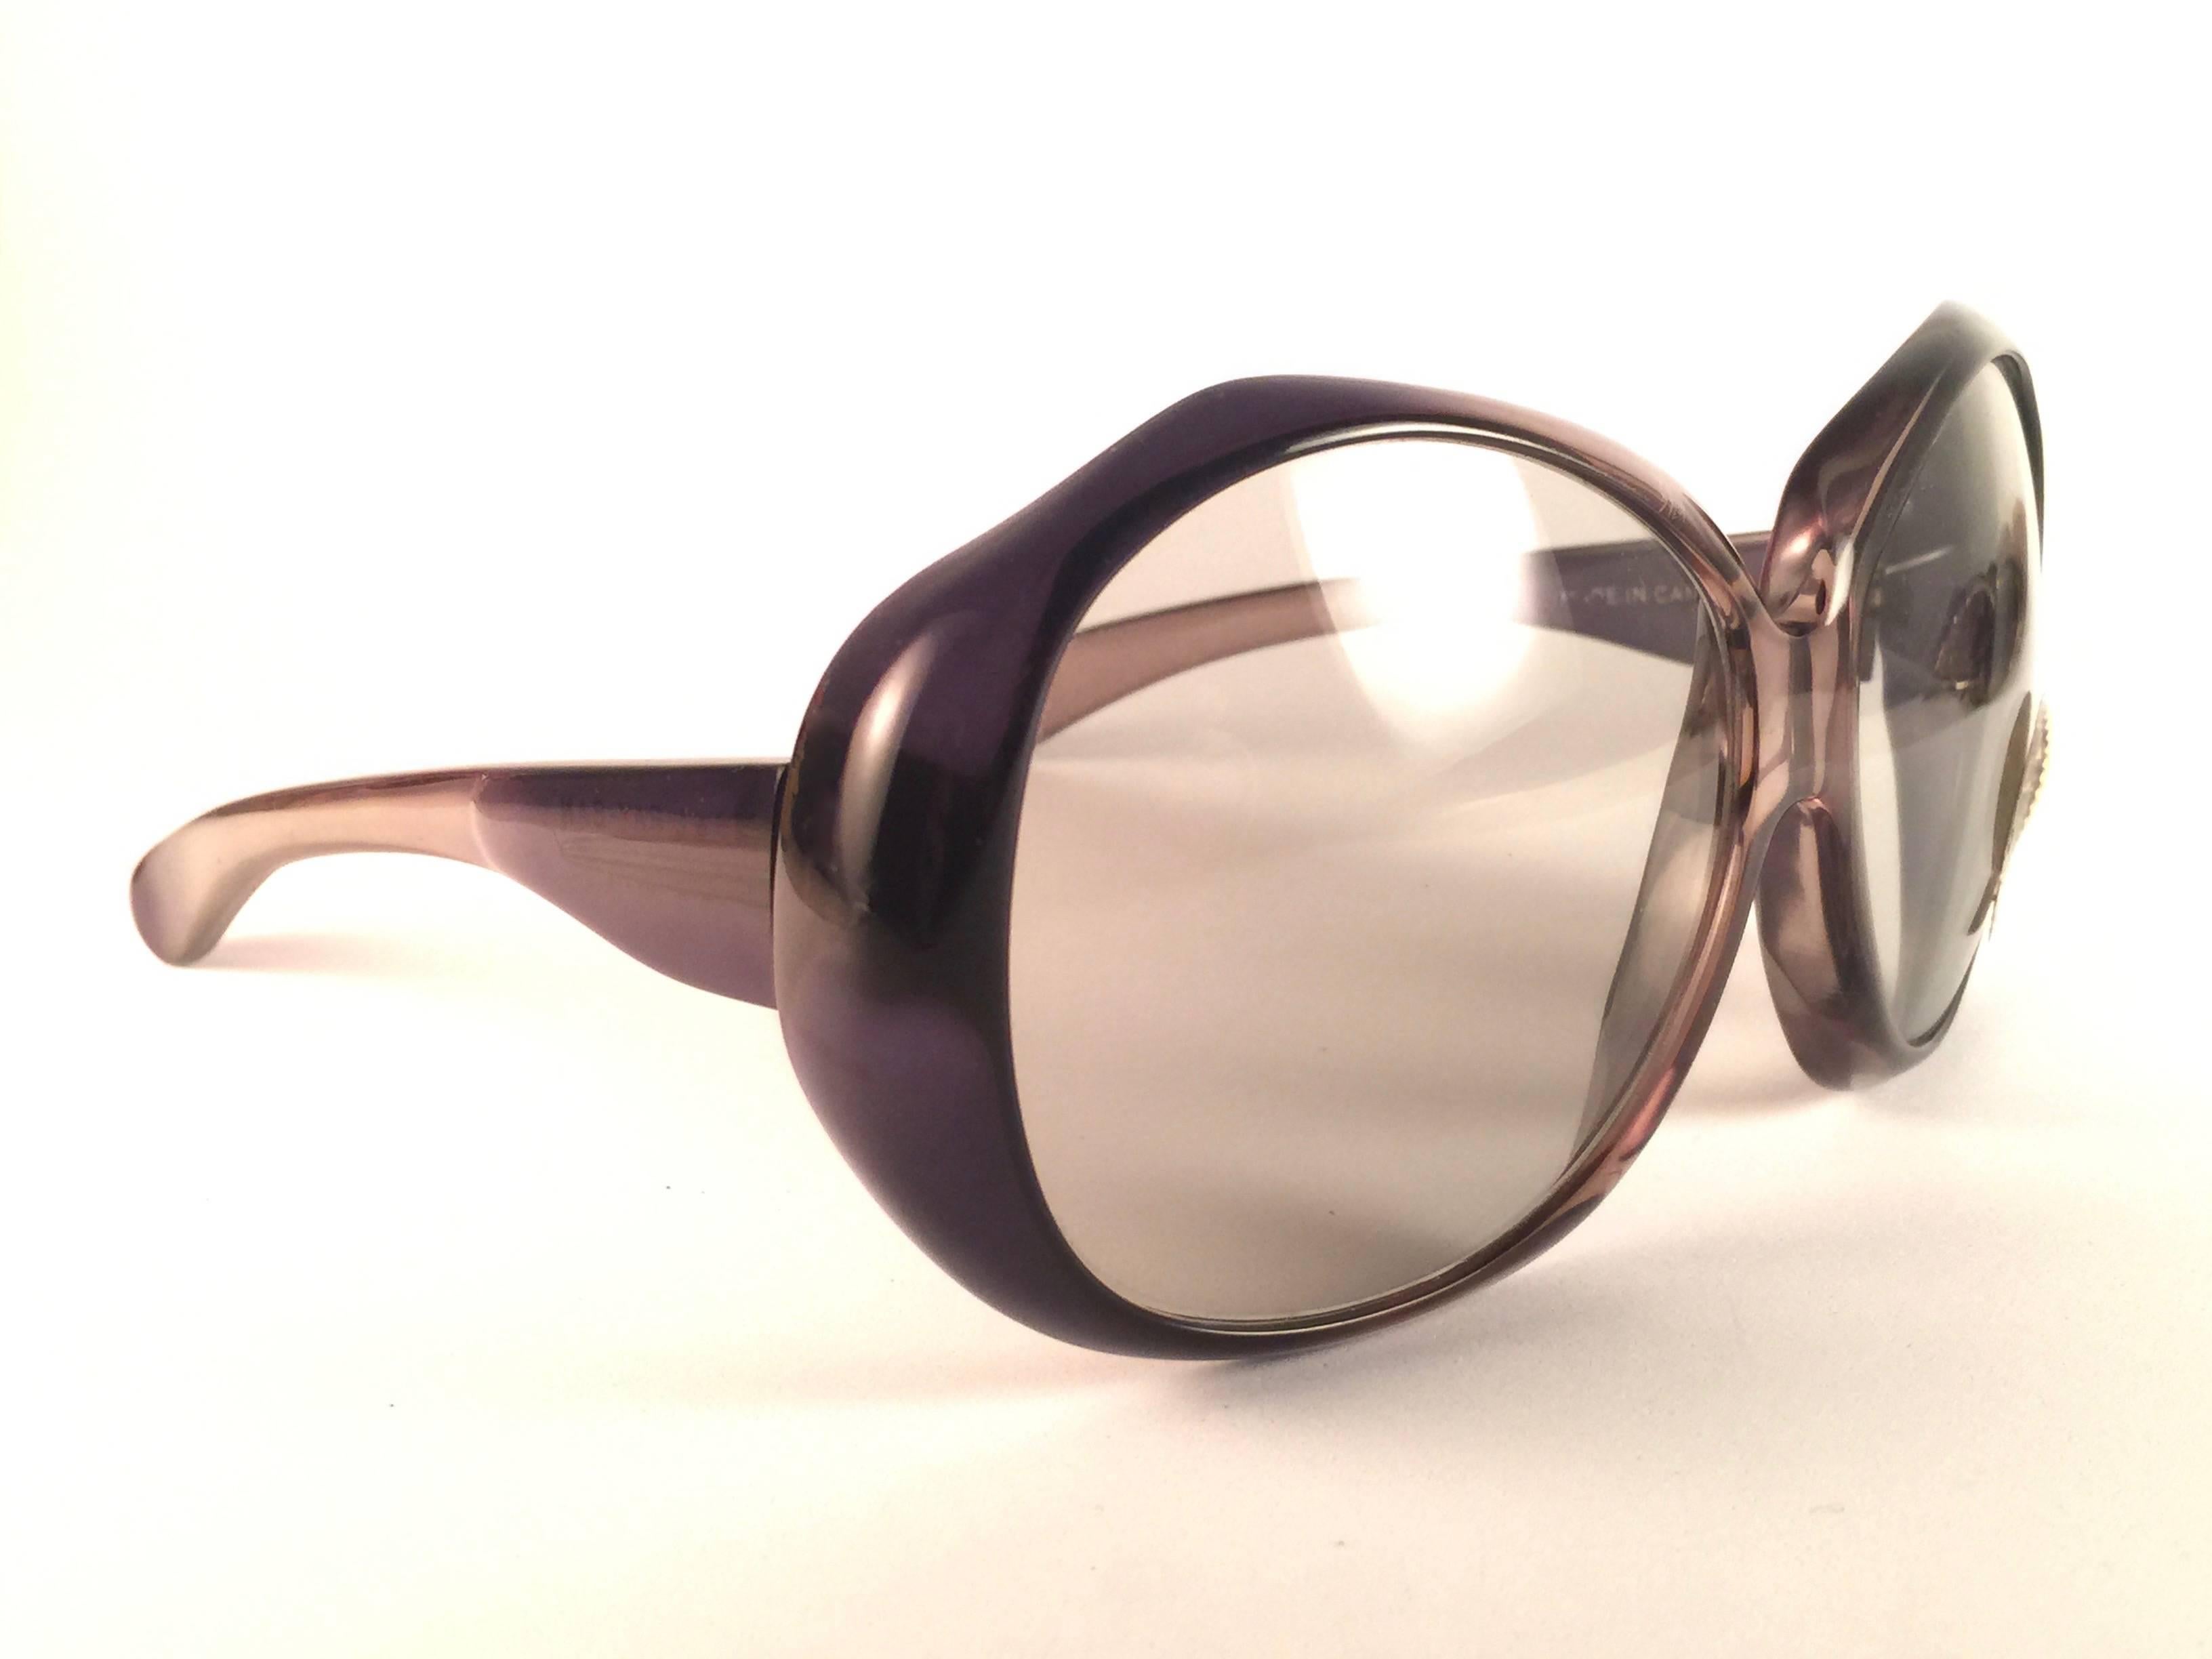 New, clear oversized Ray Ban sunglasses. Original clear lenses. 

Rare pair made in Canada.

New, never worn or displayed.

